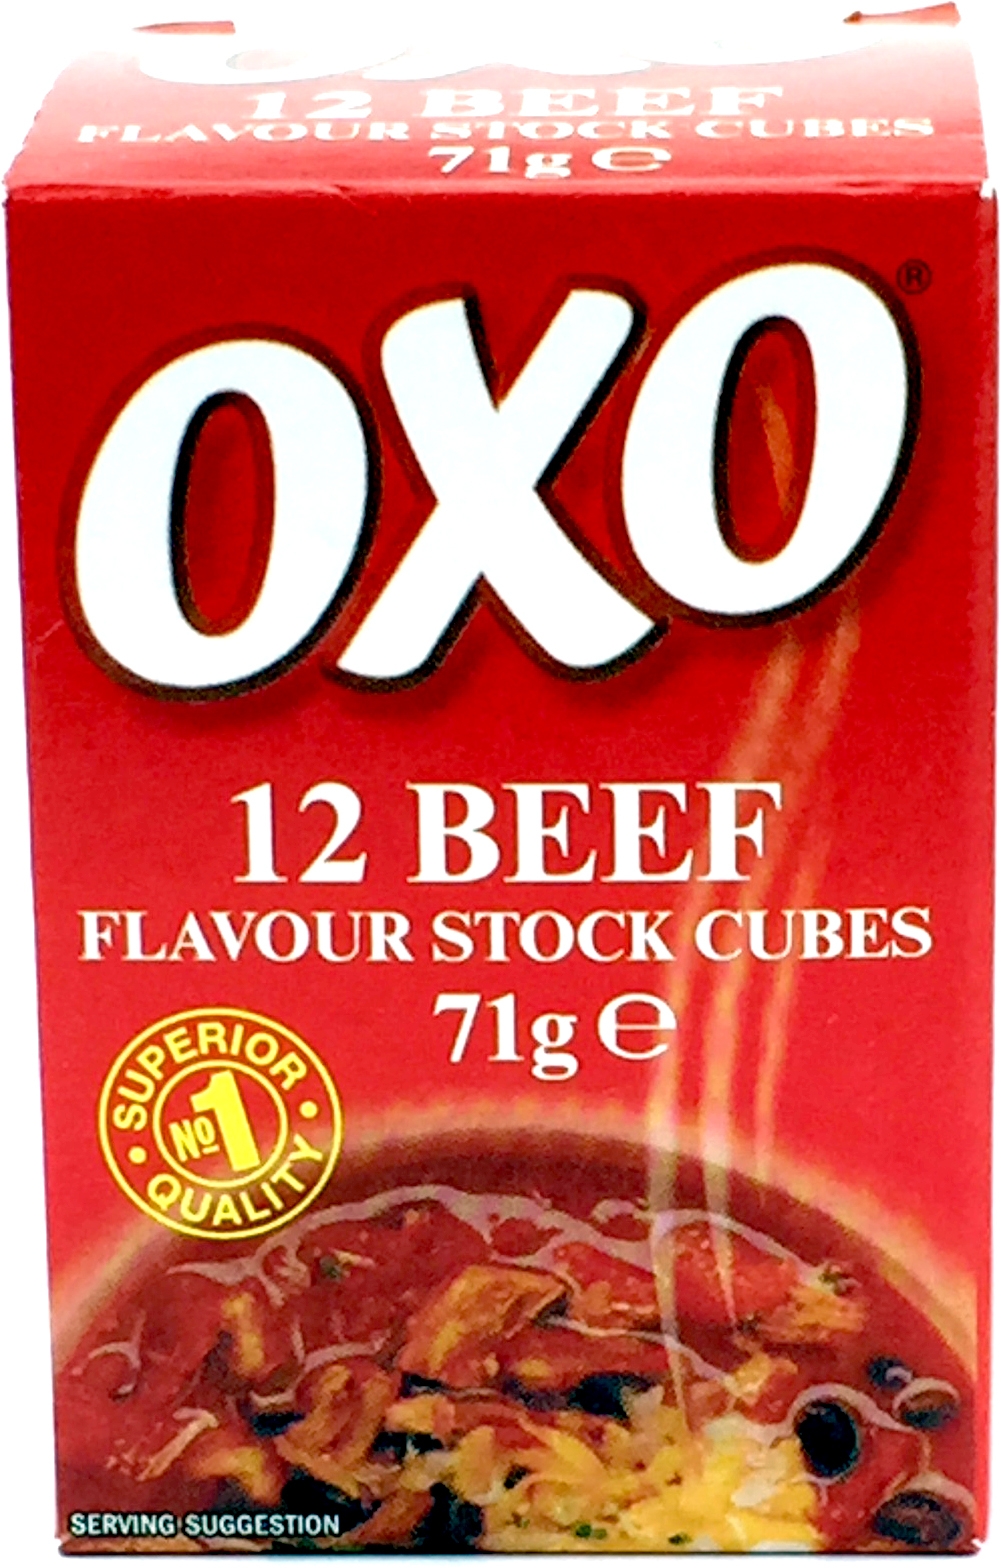 Oxo Beef Stock Cubes 71g